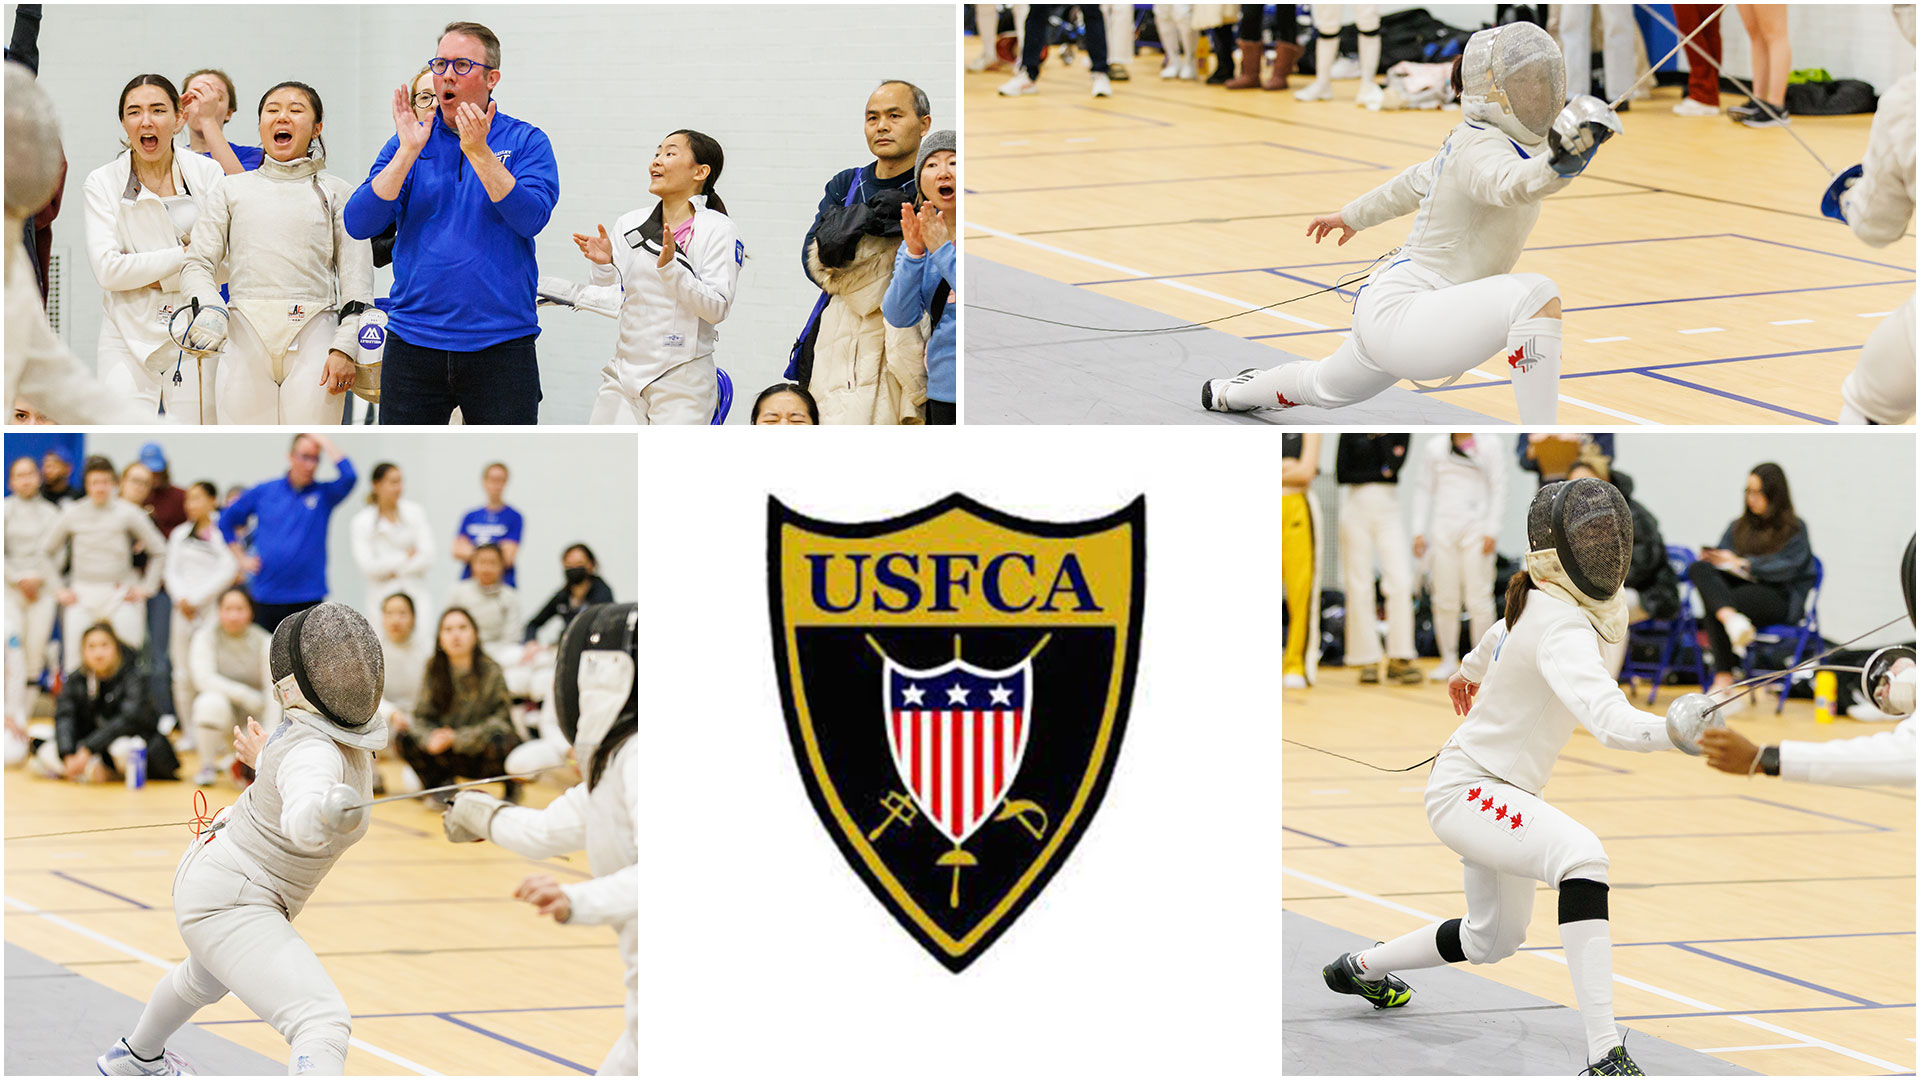 Wellesley fencing won USFCA Division III Newcomer of the Year in foil, epee, and saber, as well as Division III Coach of the Year (Frank Poulin)